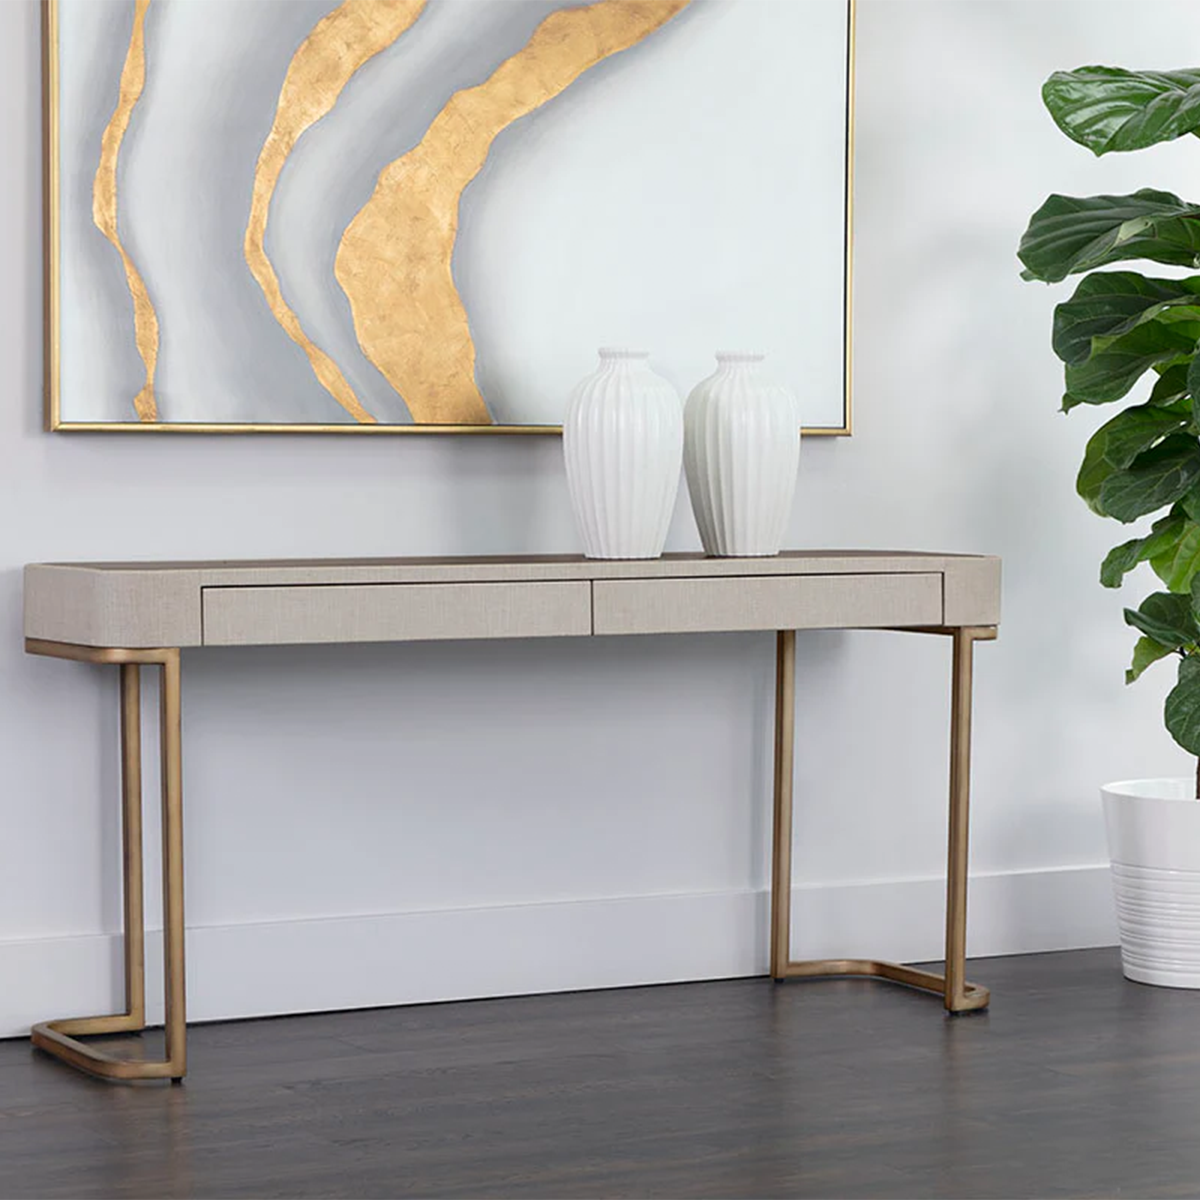 Jamille Console Table by Sunpan in a Modern Room